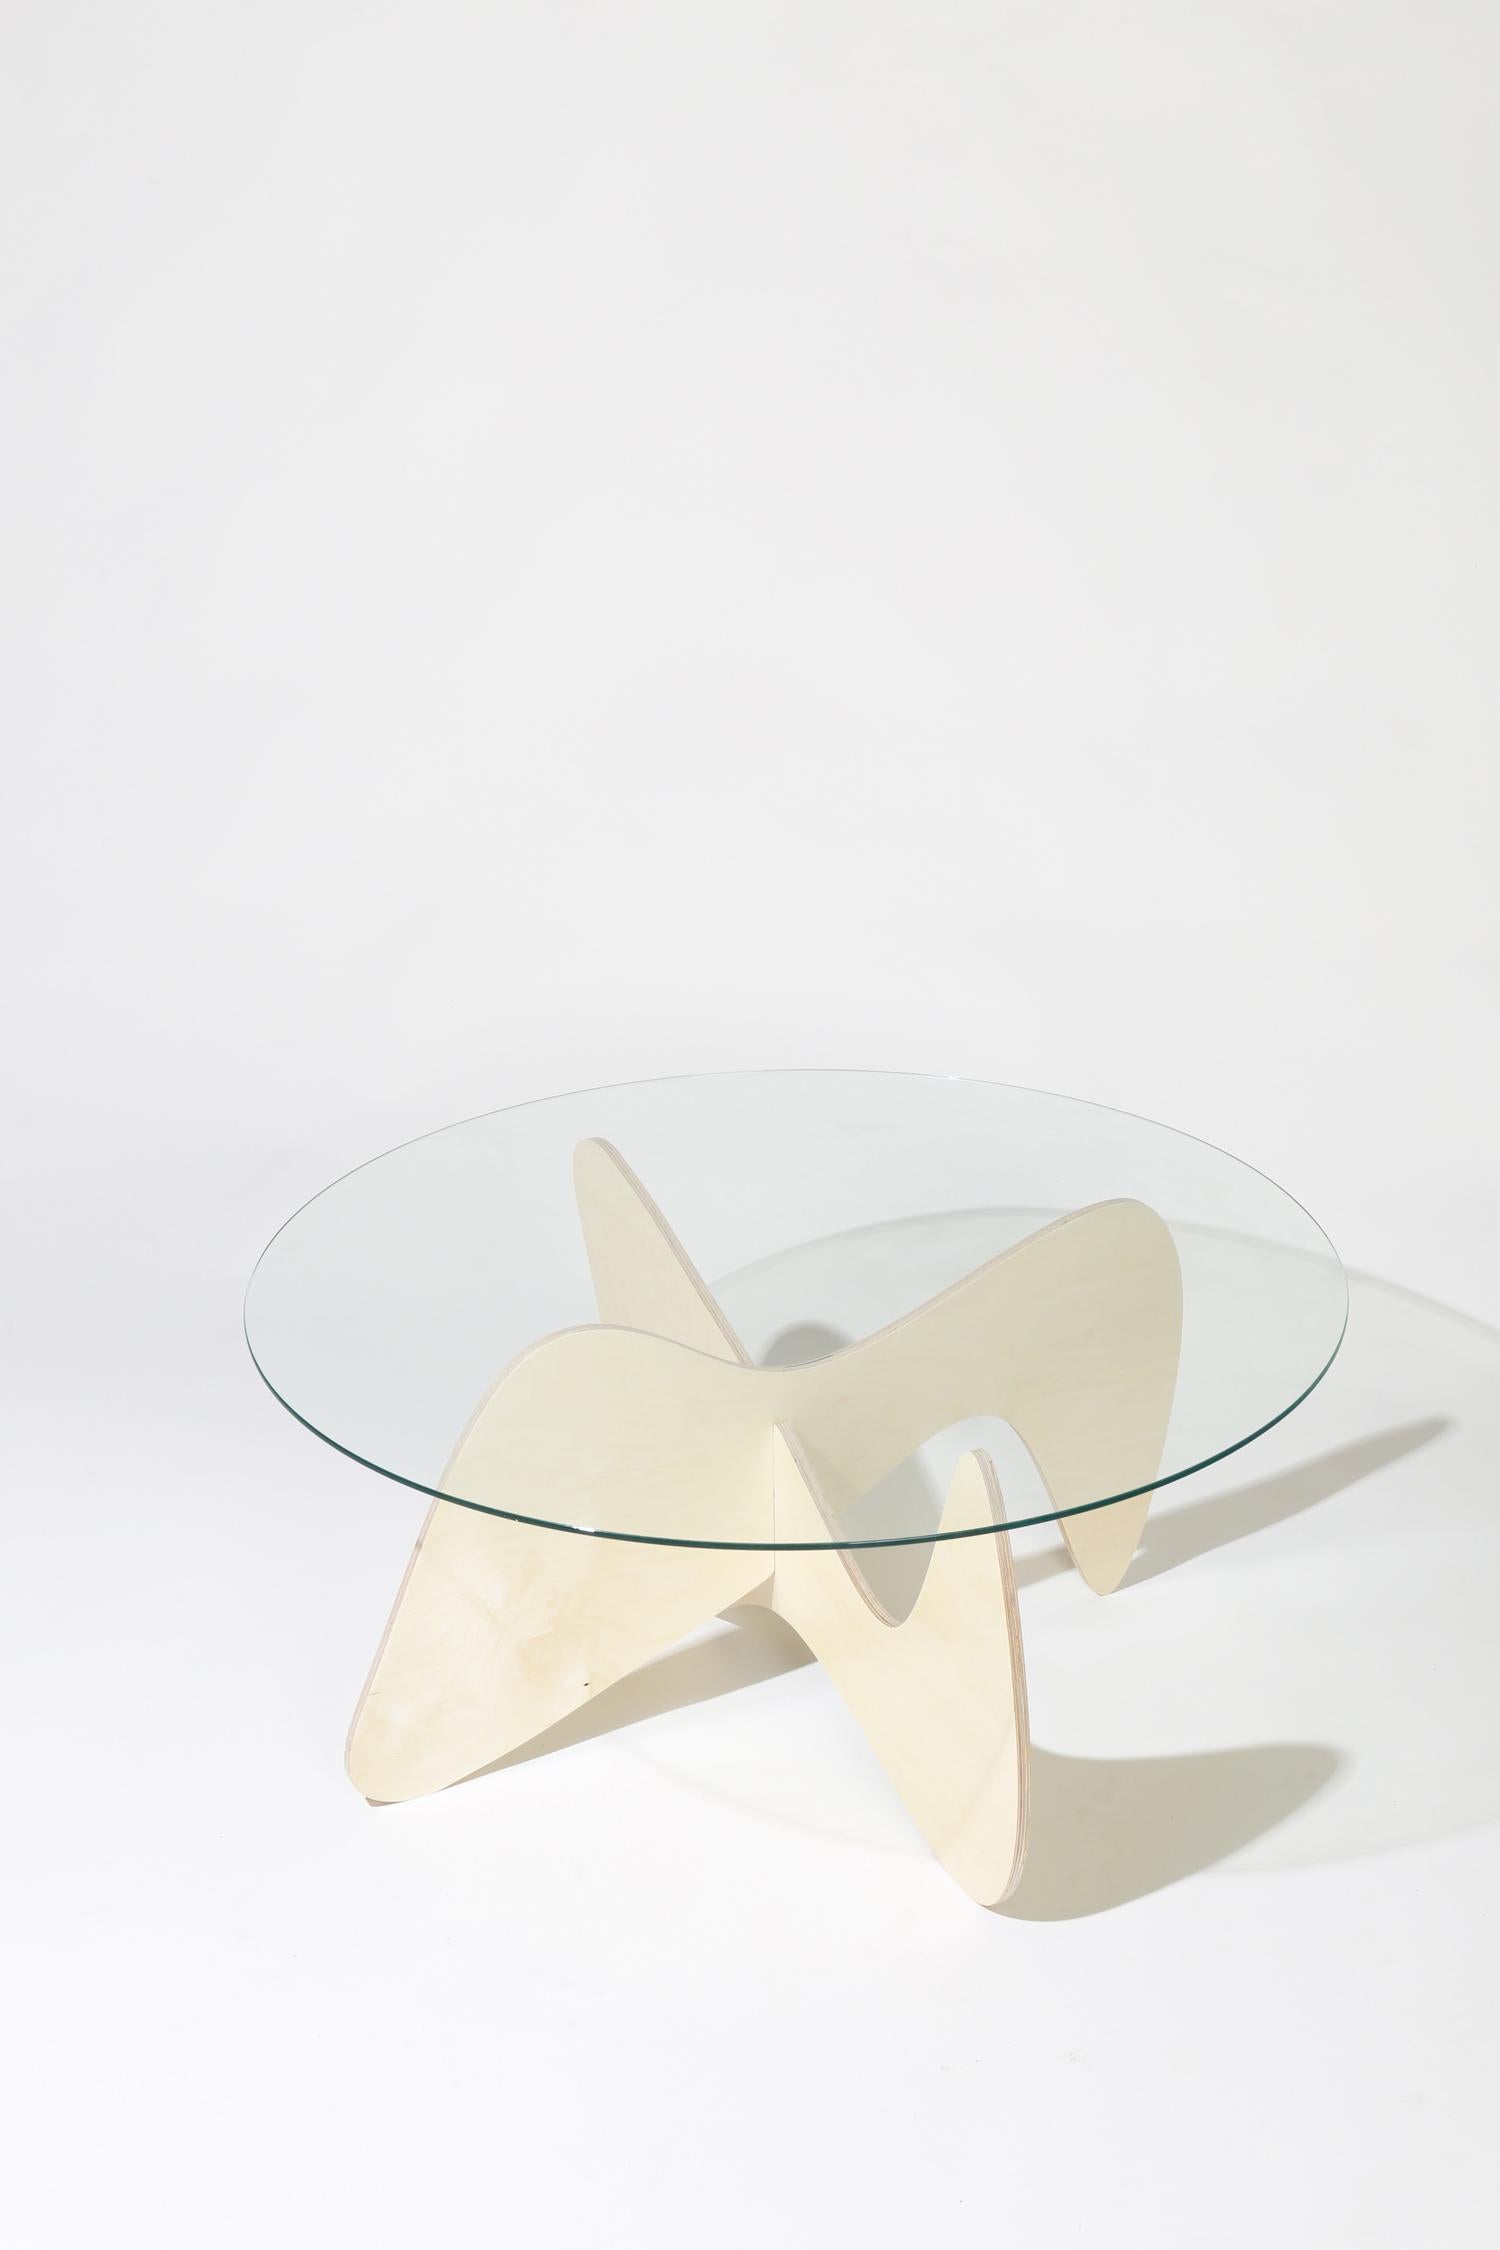 Made to order. Please allow 6 weeks for production.

With an ode to Noguchi, the Madeira table pairs modern production techniques and an expressive, elevated form. The table is made in the U.S. and available in a variety of materials and colors,